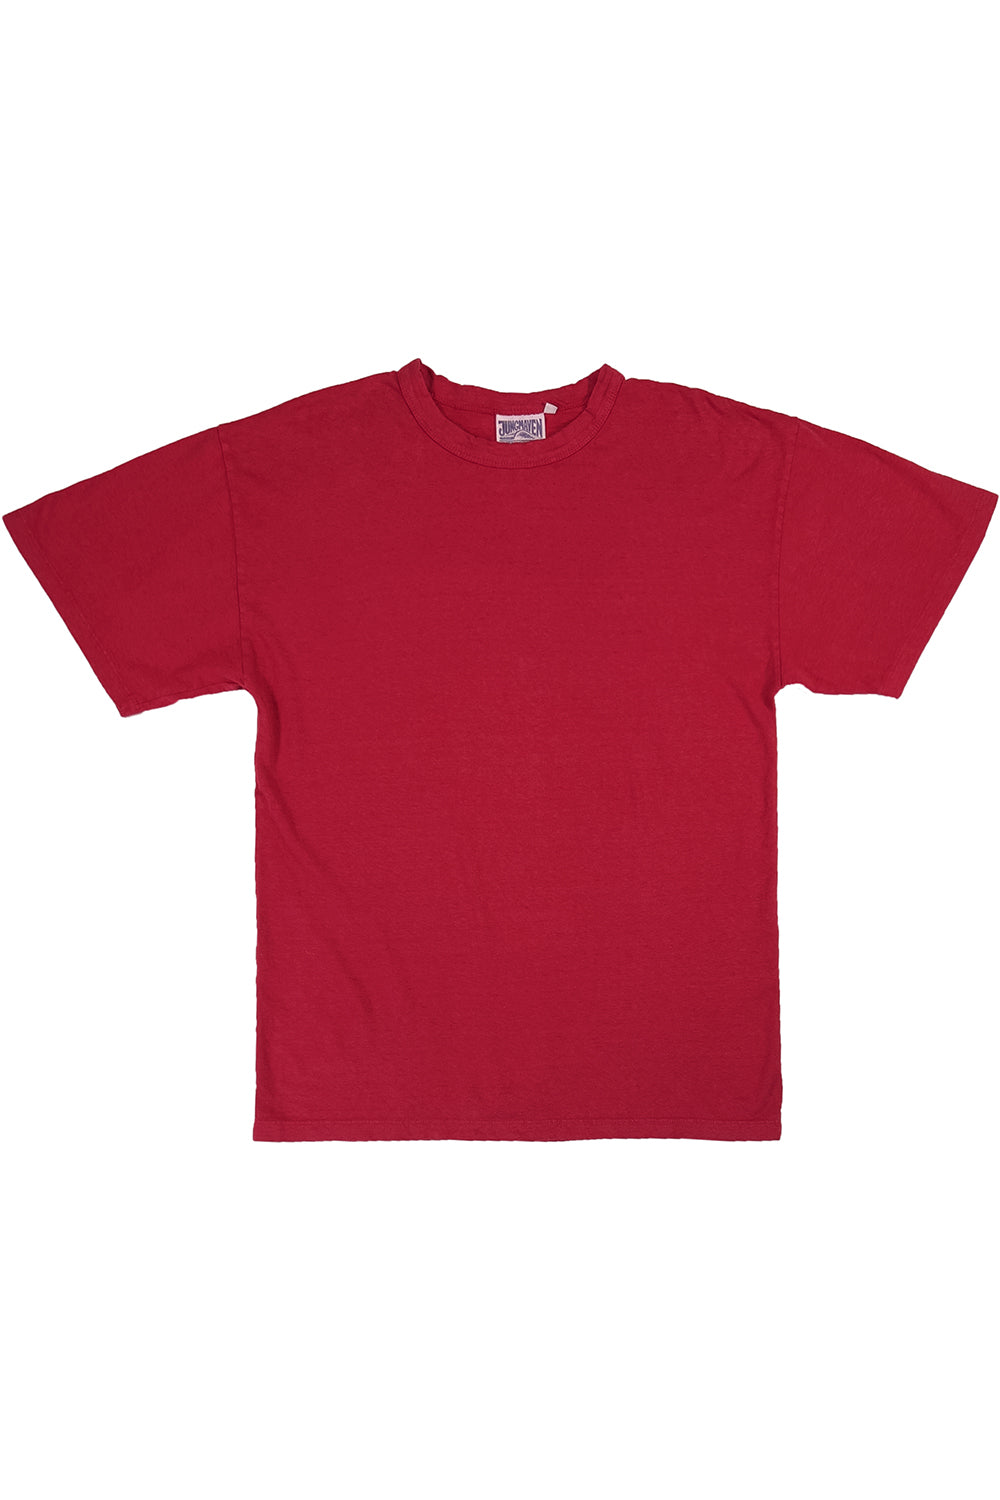 Oversized Tee | Jungmaven Hemp Clothing & Accessories / Color: Cherry Red